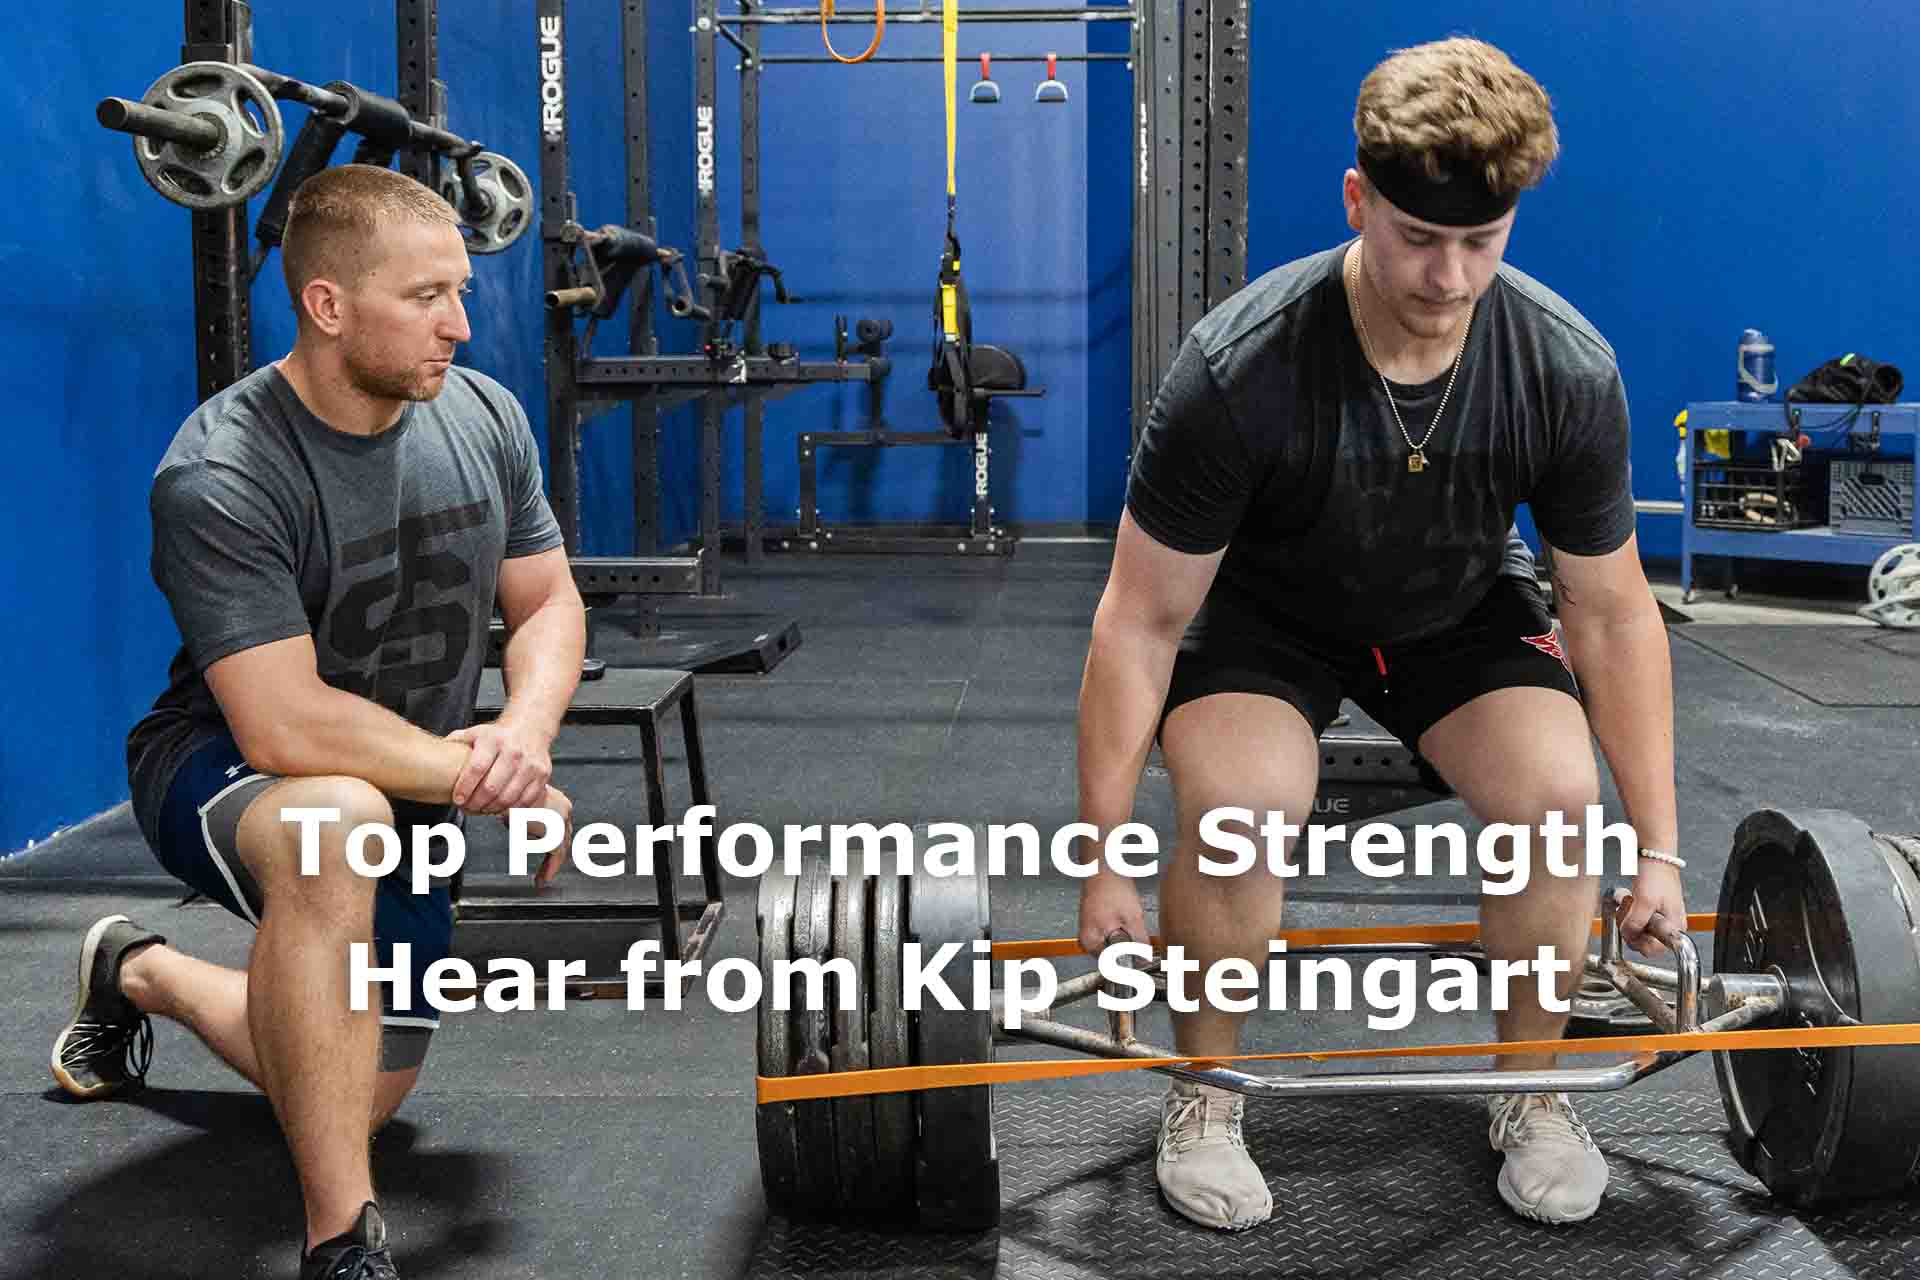 Performance Strength for - Strength Top Training Athletes